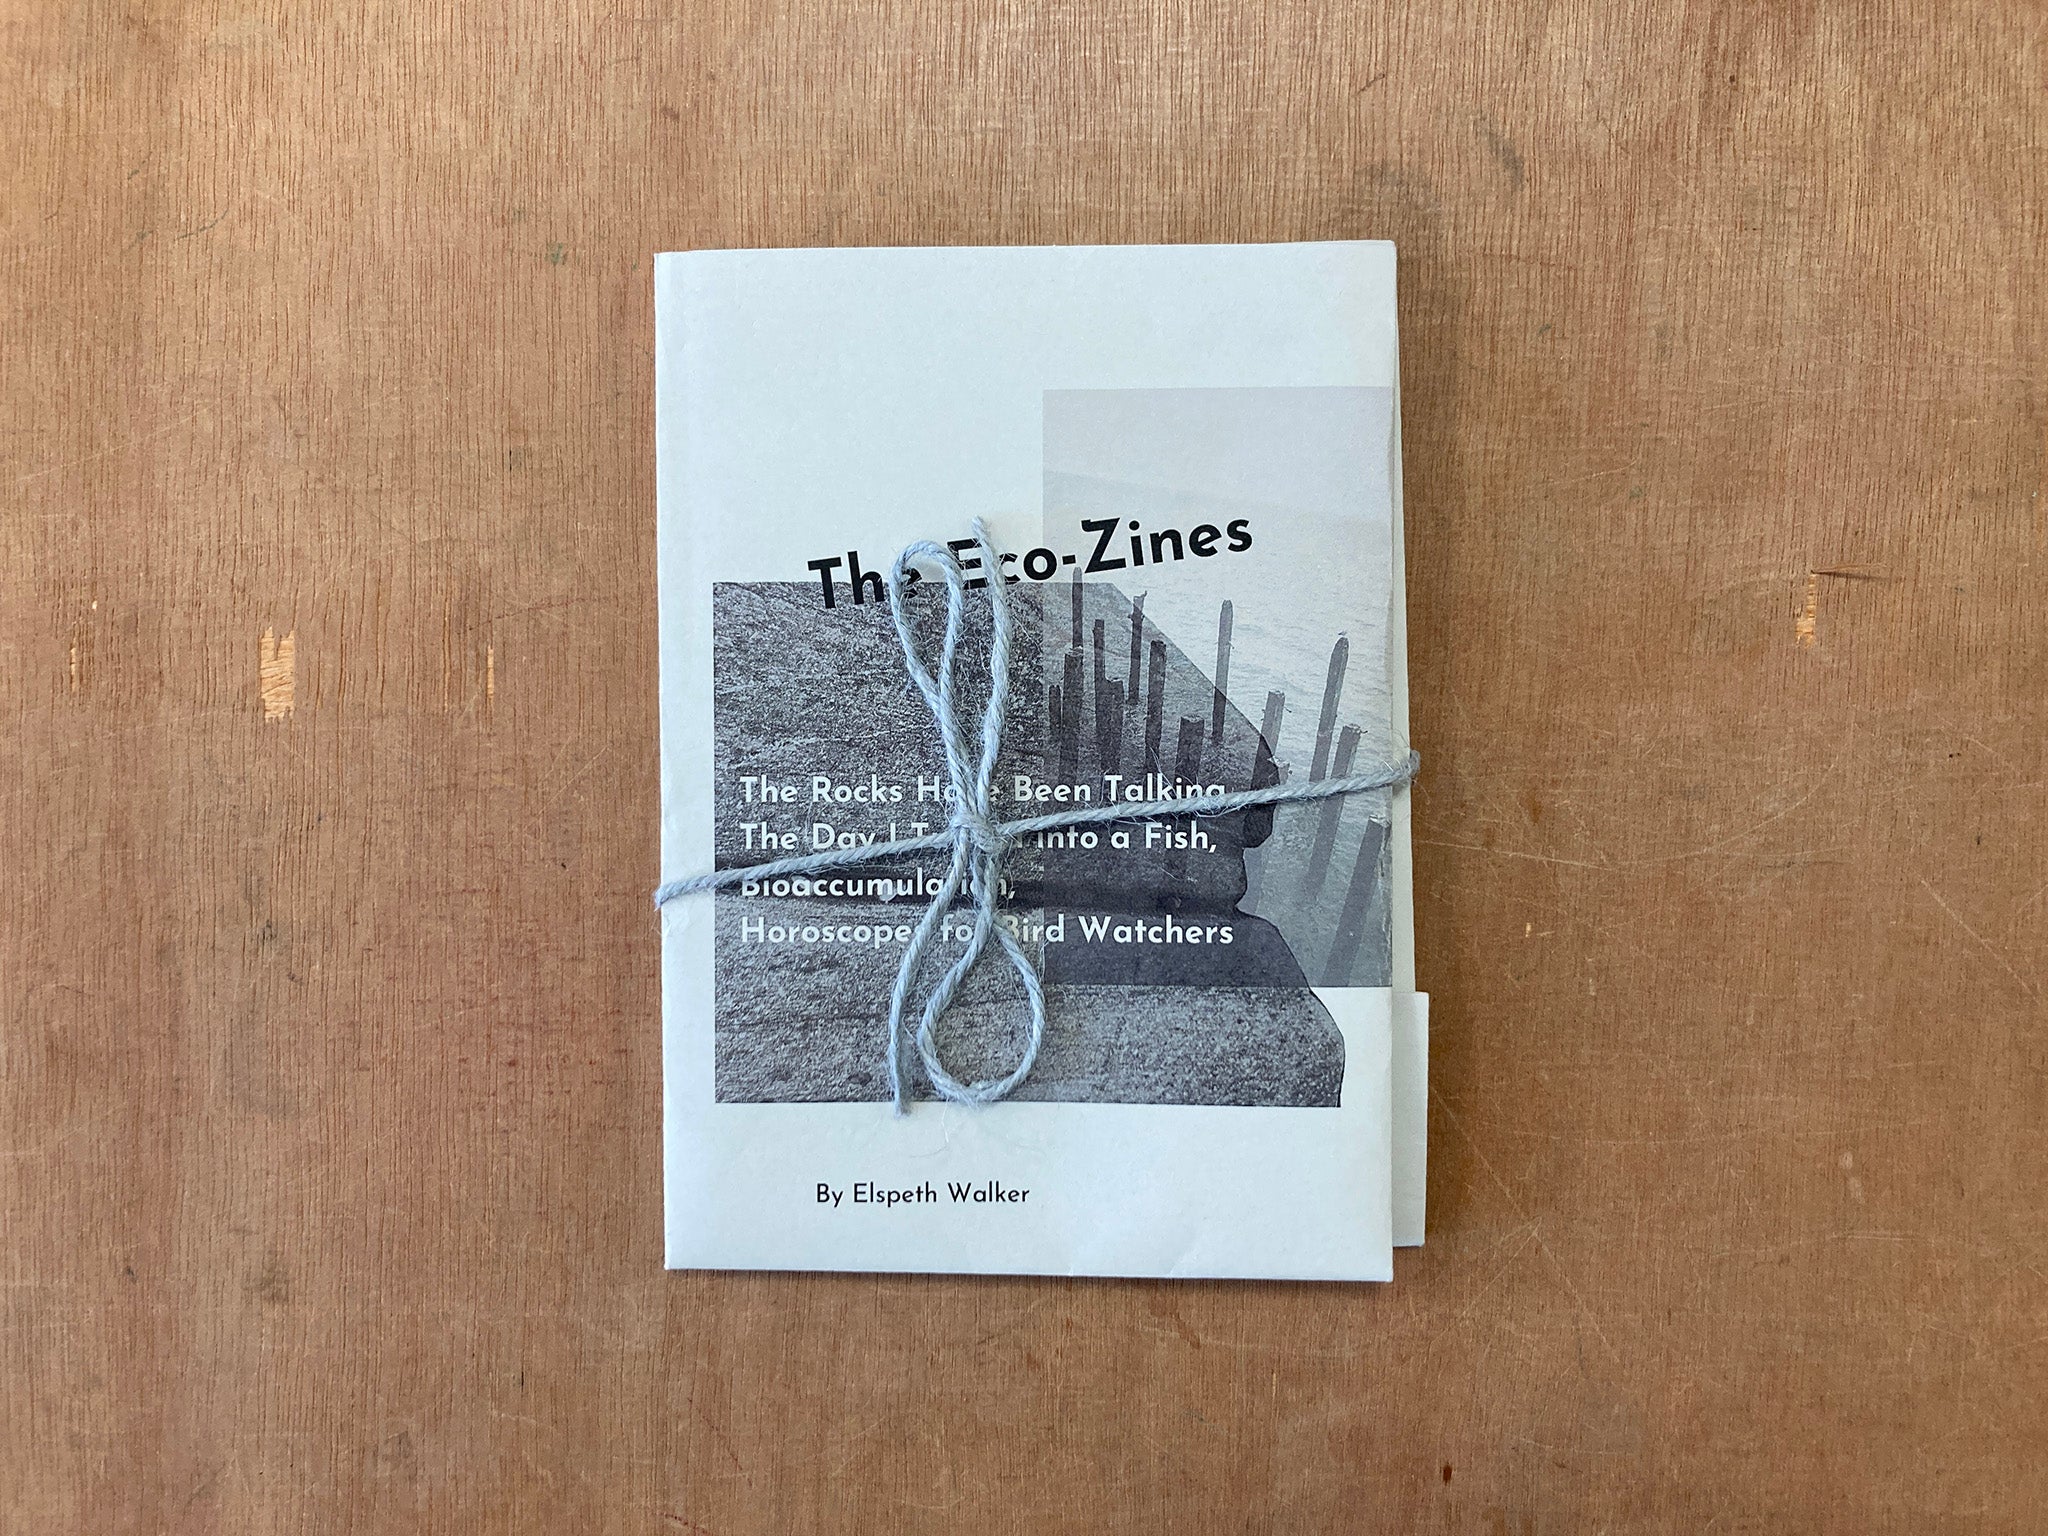 THE ECO-ZINES by Elspeth Walker and Andrew Brown